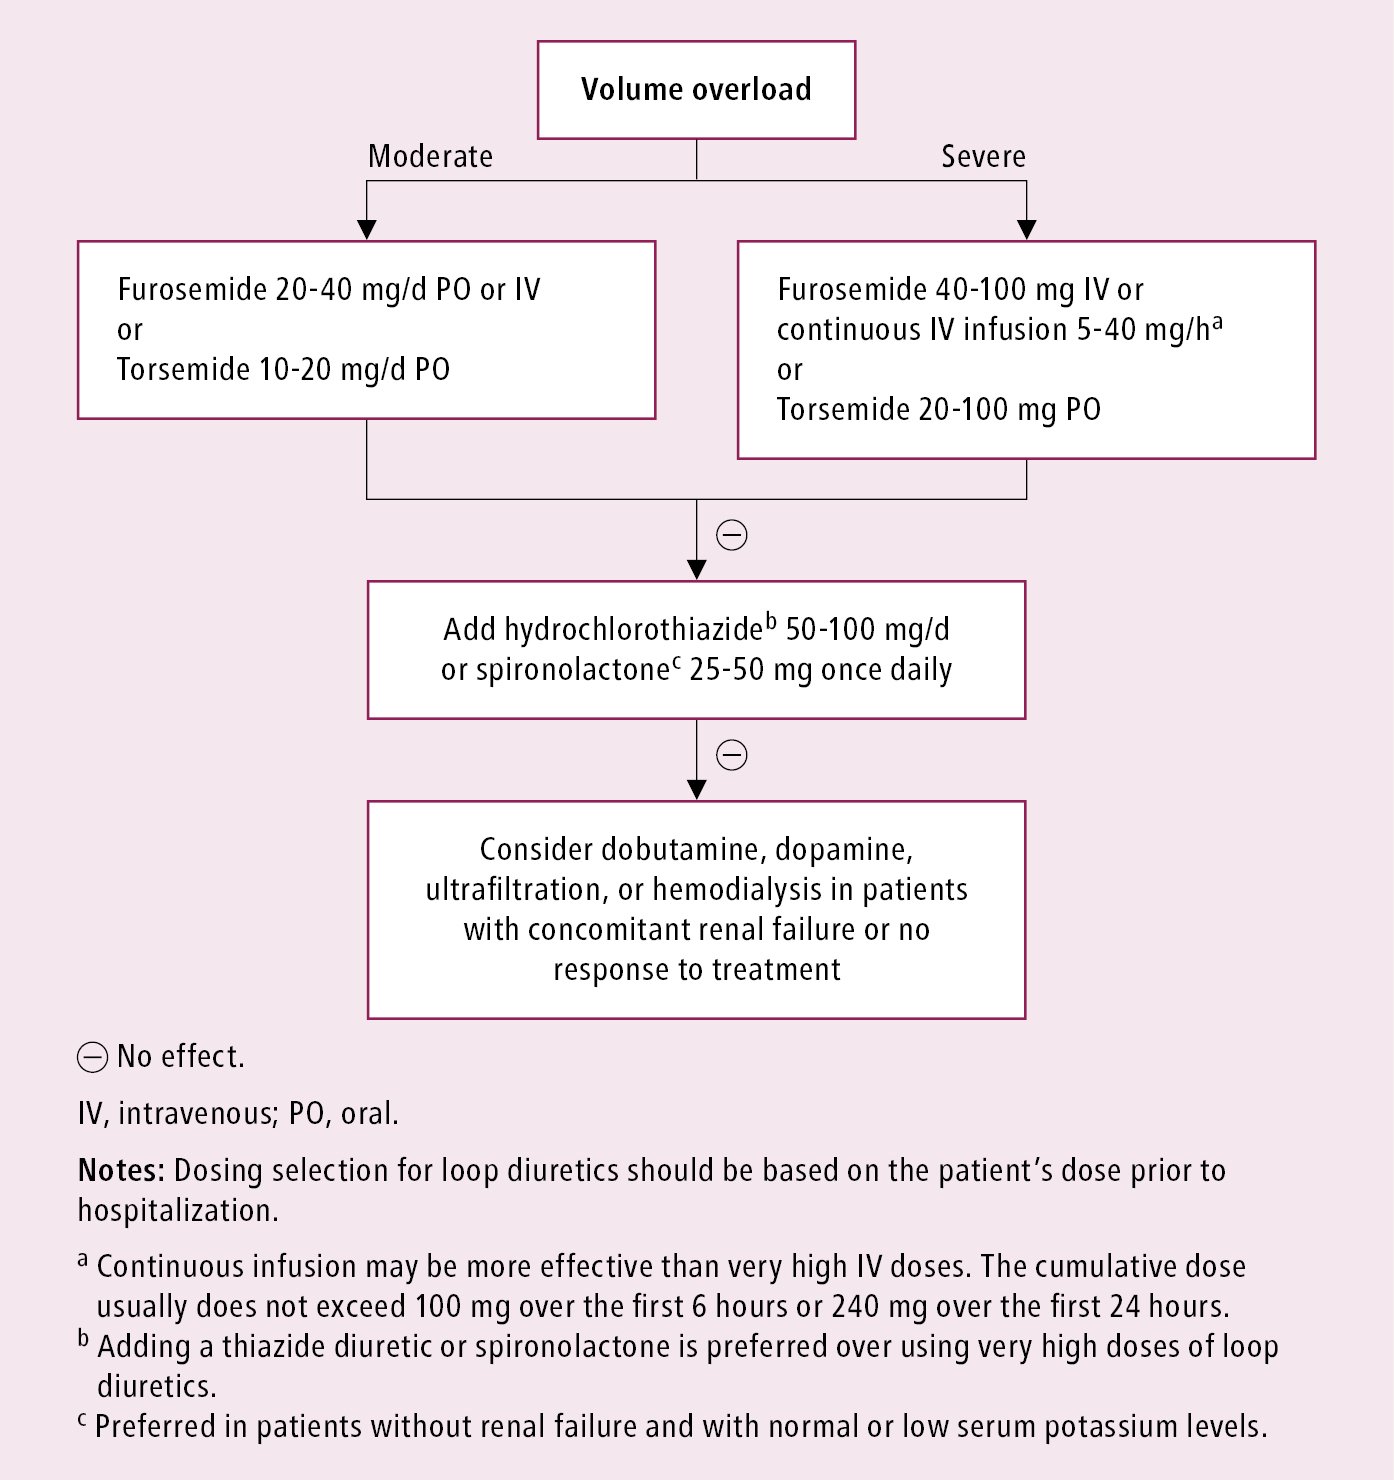 Figure 031_1_0269.  Algorithm of diuretic therapy in patients with acute heart failure.  Based on  Eur J Heart Fail. 2016;18(8):891-975   .  